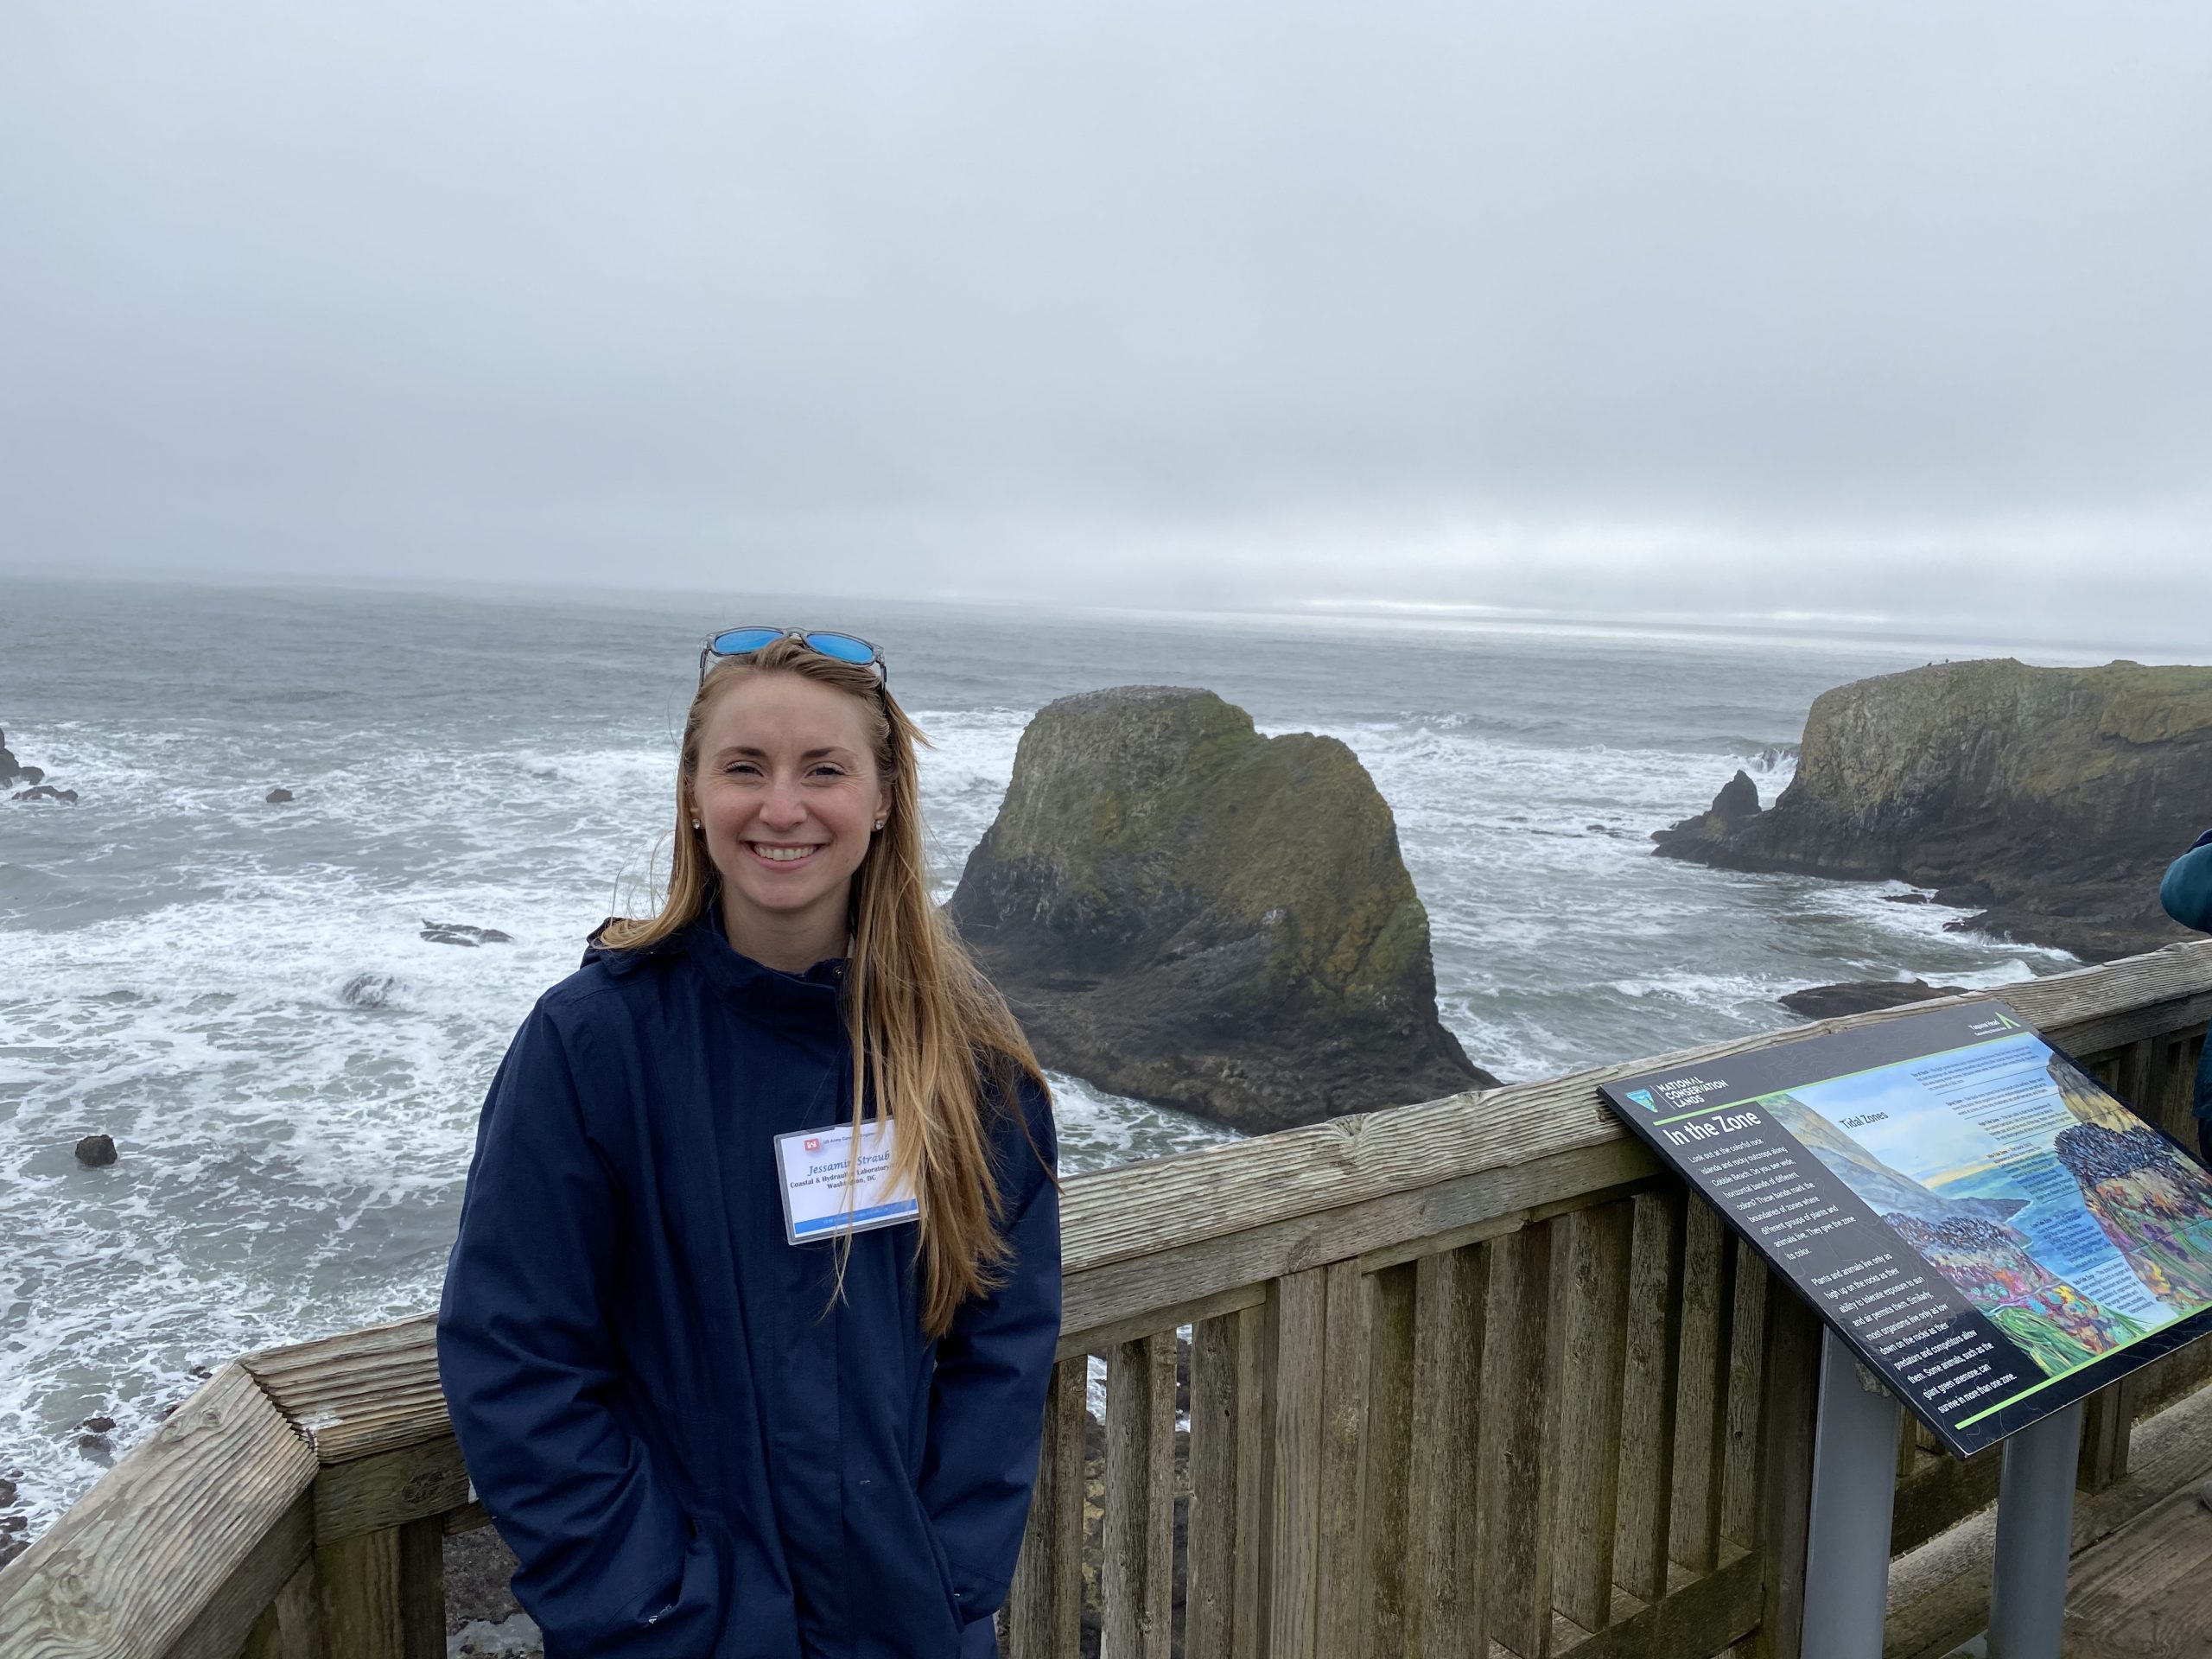 On Straub's tour of the Oregon coast, she visited the Yaquina Head Marine Garden to learn about ongoing research projects.